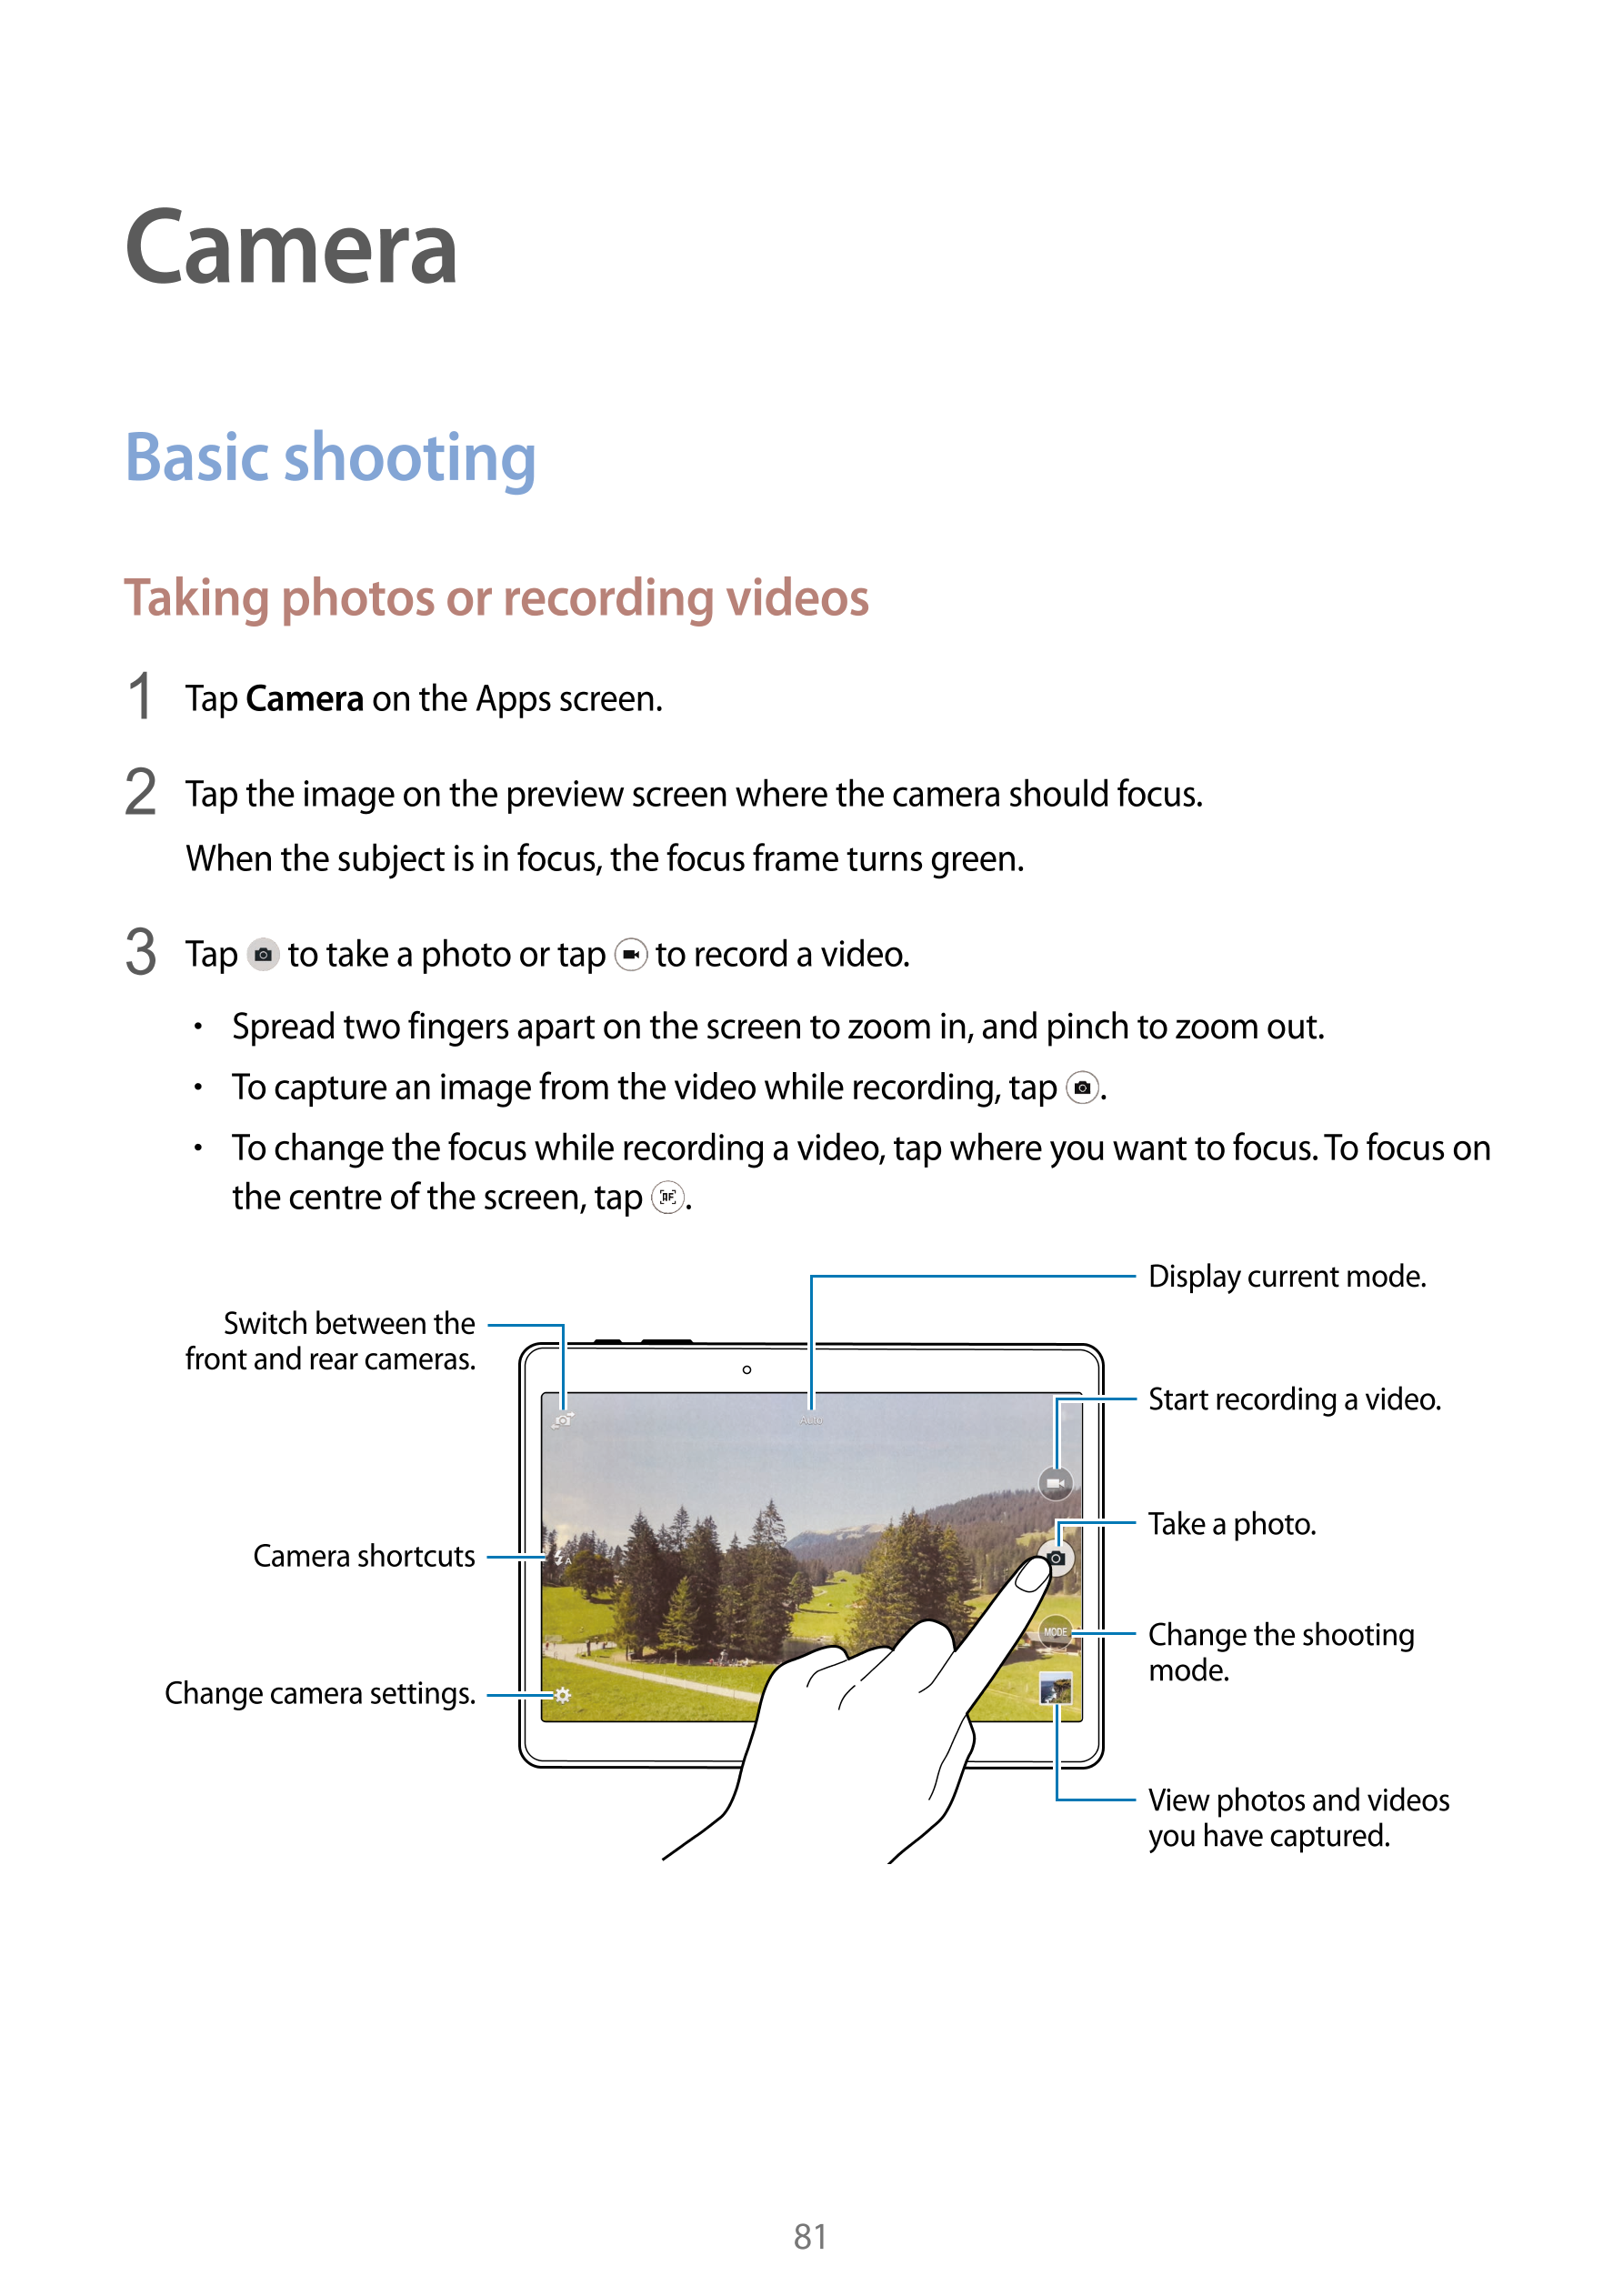 Camera
Basic shooting
Taking photos or recording videos
1  Tap  Camera on the Apps screen.
2  Tap the image on the preview scree